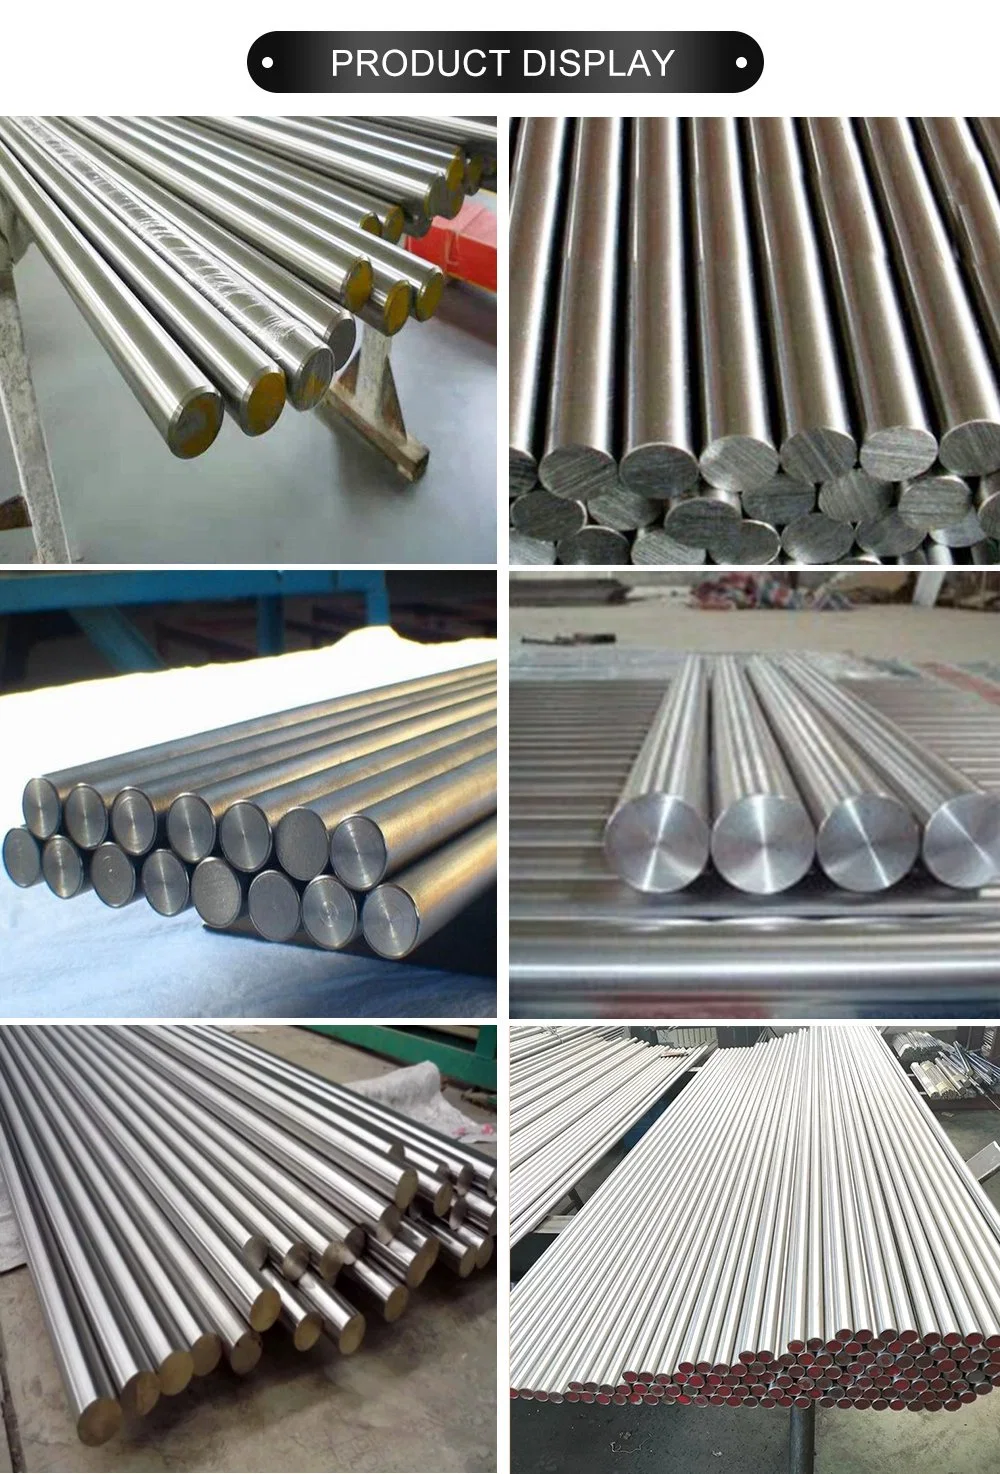 Ss410 Diameter 2 Inch X 2 Meter AISI 410 ASTM Grade 410s21 Stainless Steel Round Bar